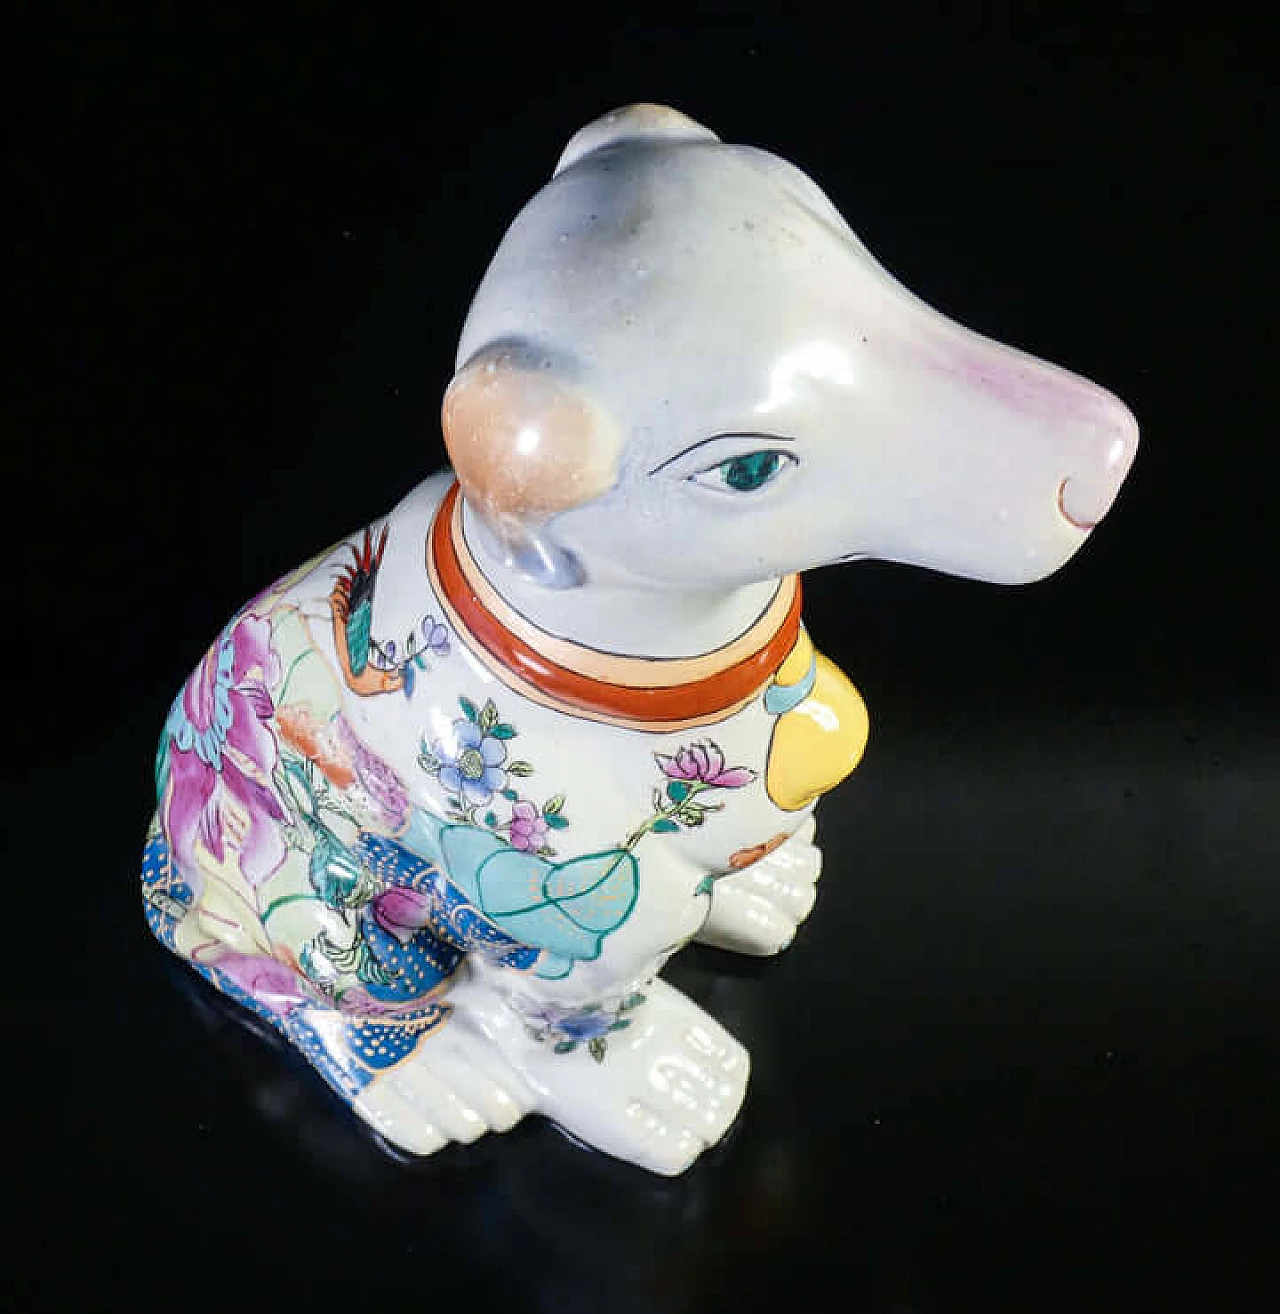 Ceramic dog sculpture painted with floral motifs 7